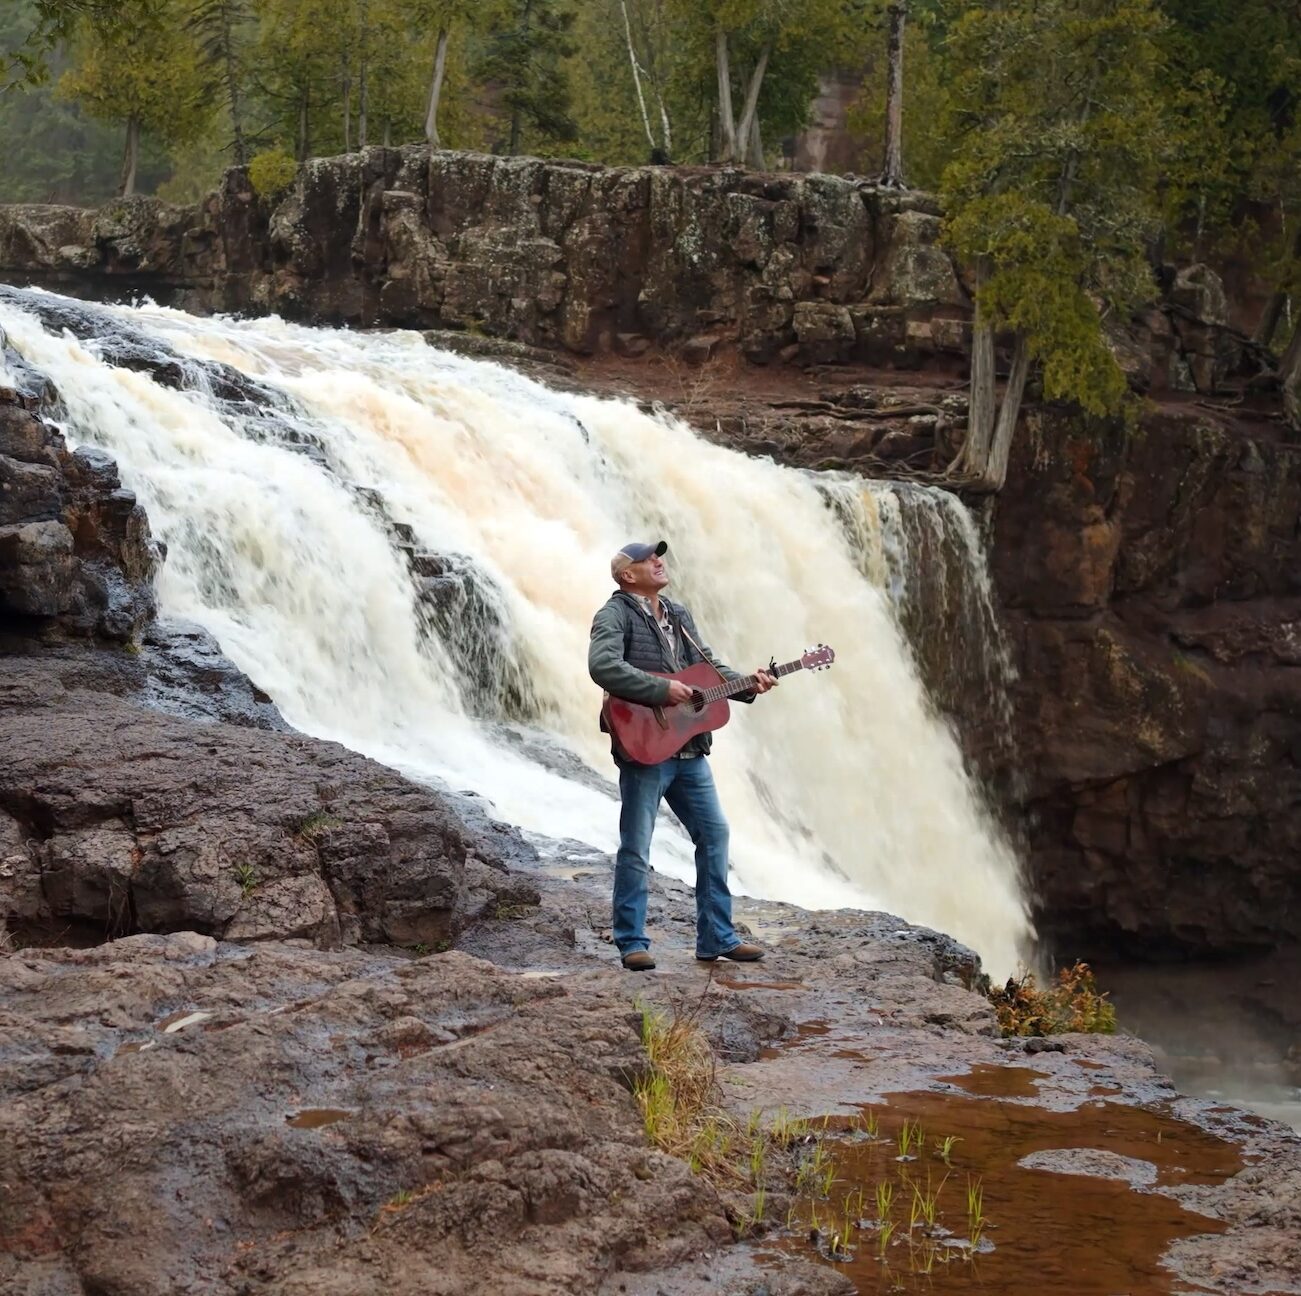 Brian Leighton playing a guitar in front of Gooseberry Falls, MN.